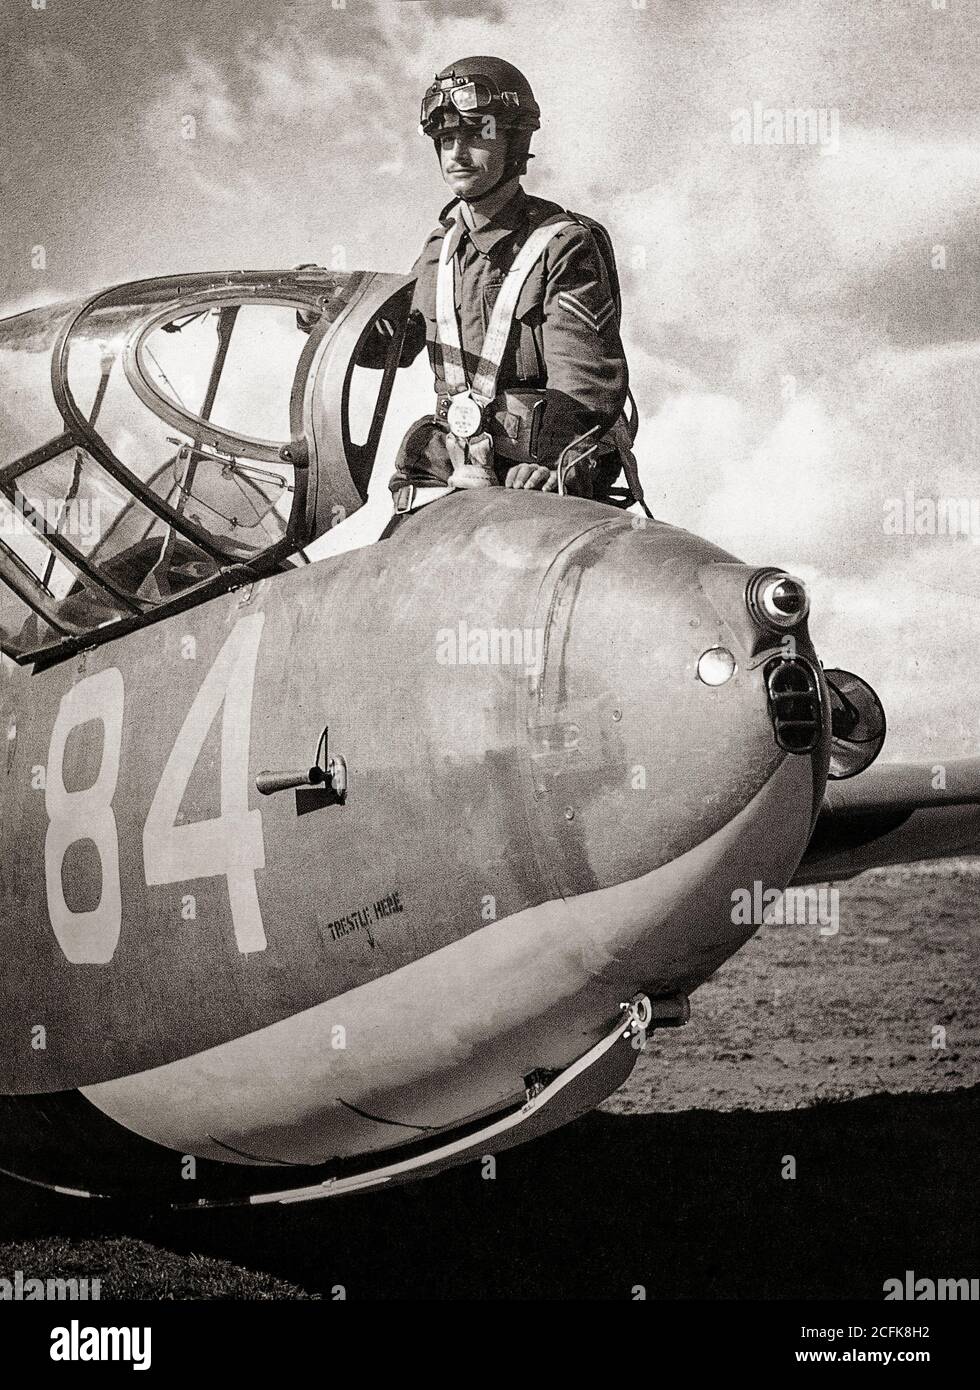 An army pilot in a Hotspur military glider designed and built by the British company General Aircraft Ltd during World War II. It was the glider in which all pilots belonging to the Glider Pilot Regiment received their initial instruction. Although relatively heavy with a high sink rate, the Hotspur exhibited good flying characteristics allowing novice pilots to quickly gain proficiency, but never saw operational use. Stock Photo